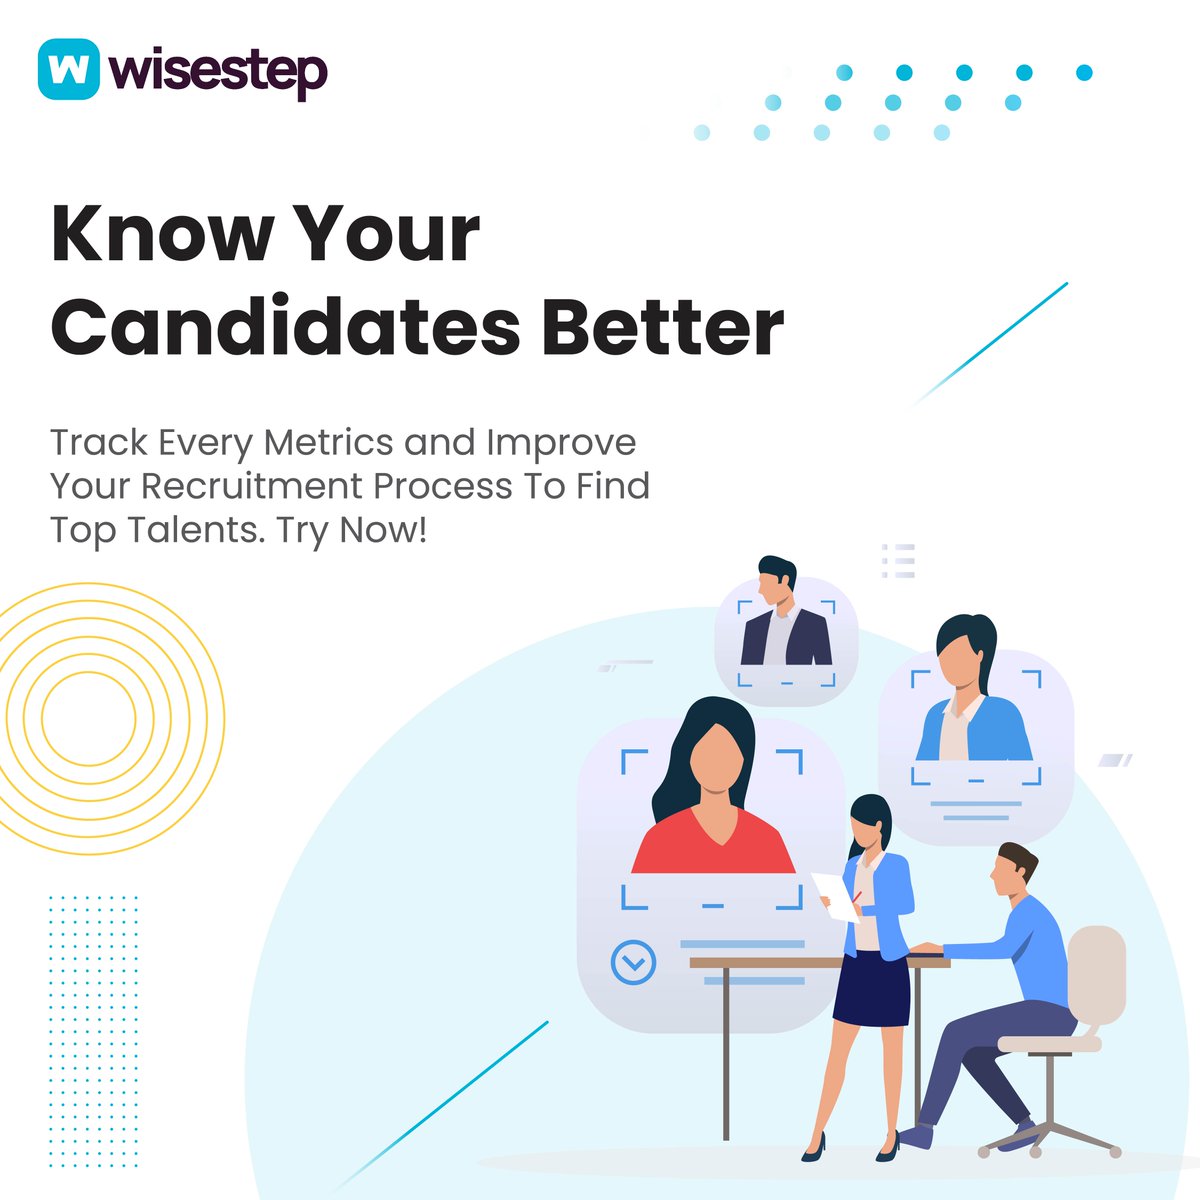 Wisestep ATS offers real-time analytics and reports to help you track the effectiveness of your recruitment strategies and make data-driven hiring decisions. 

Book a demo now to know more about Wisestep ATS

buff.ly/3SywYr8

#analytics #recruitment #hiring #WisestepATS